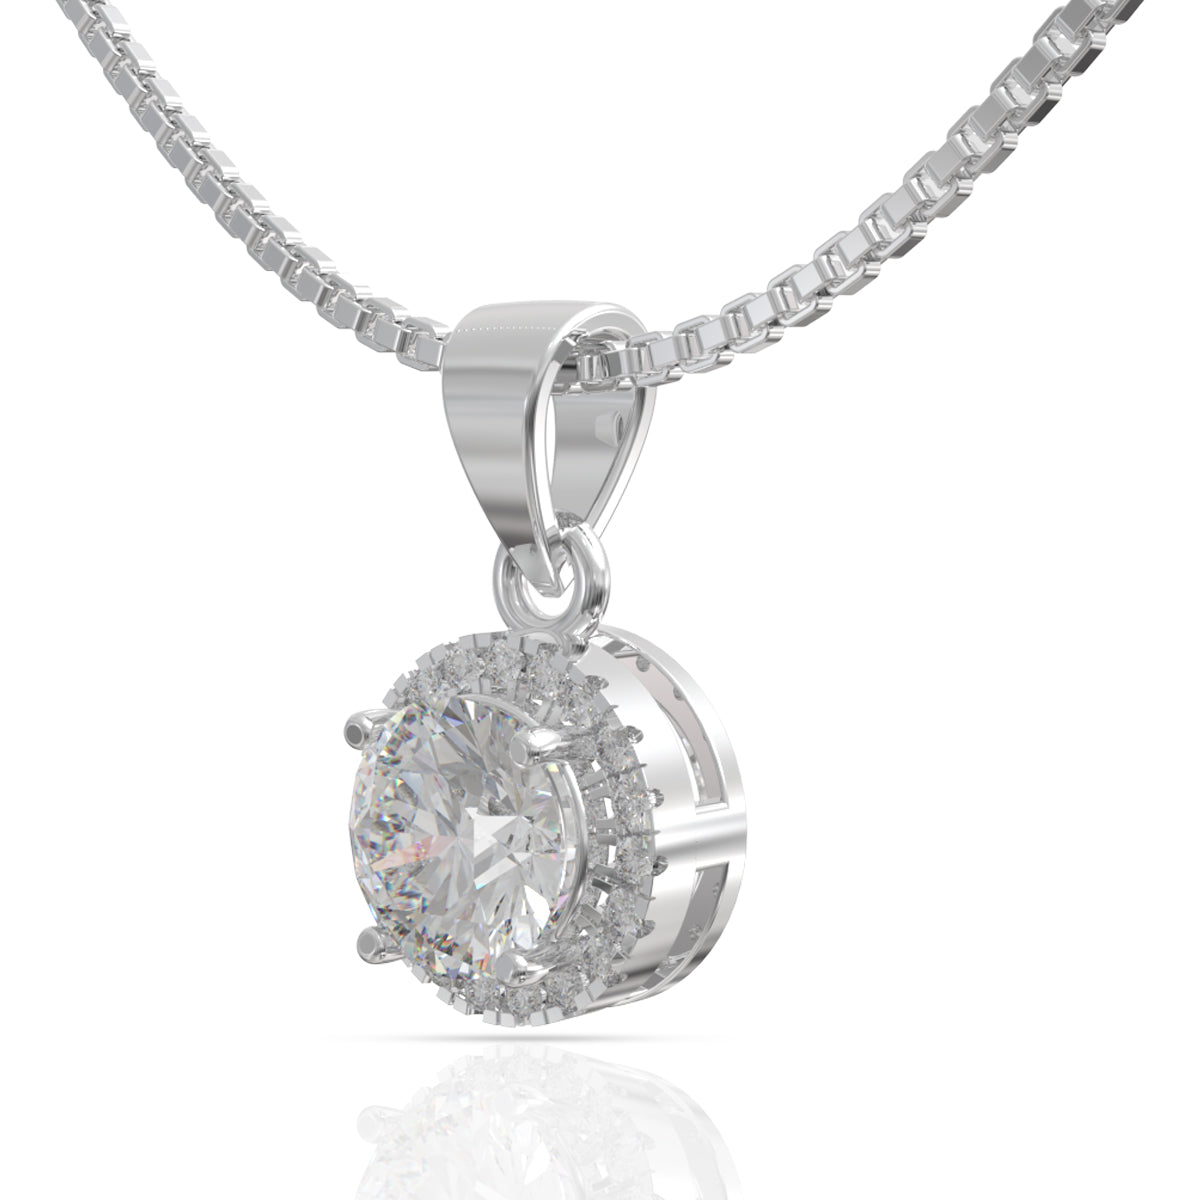 Stunning Silver Solitaire Pendant